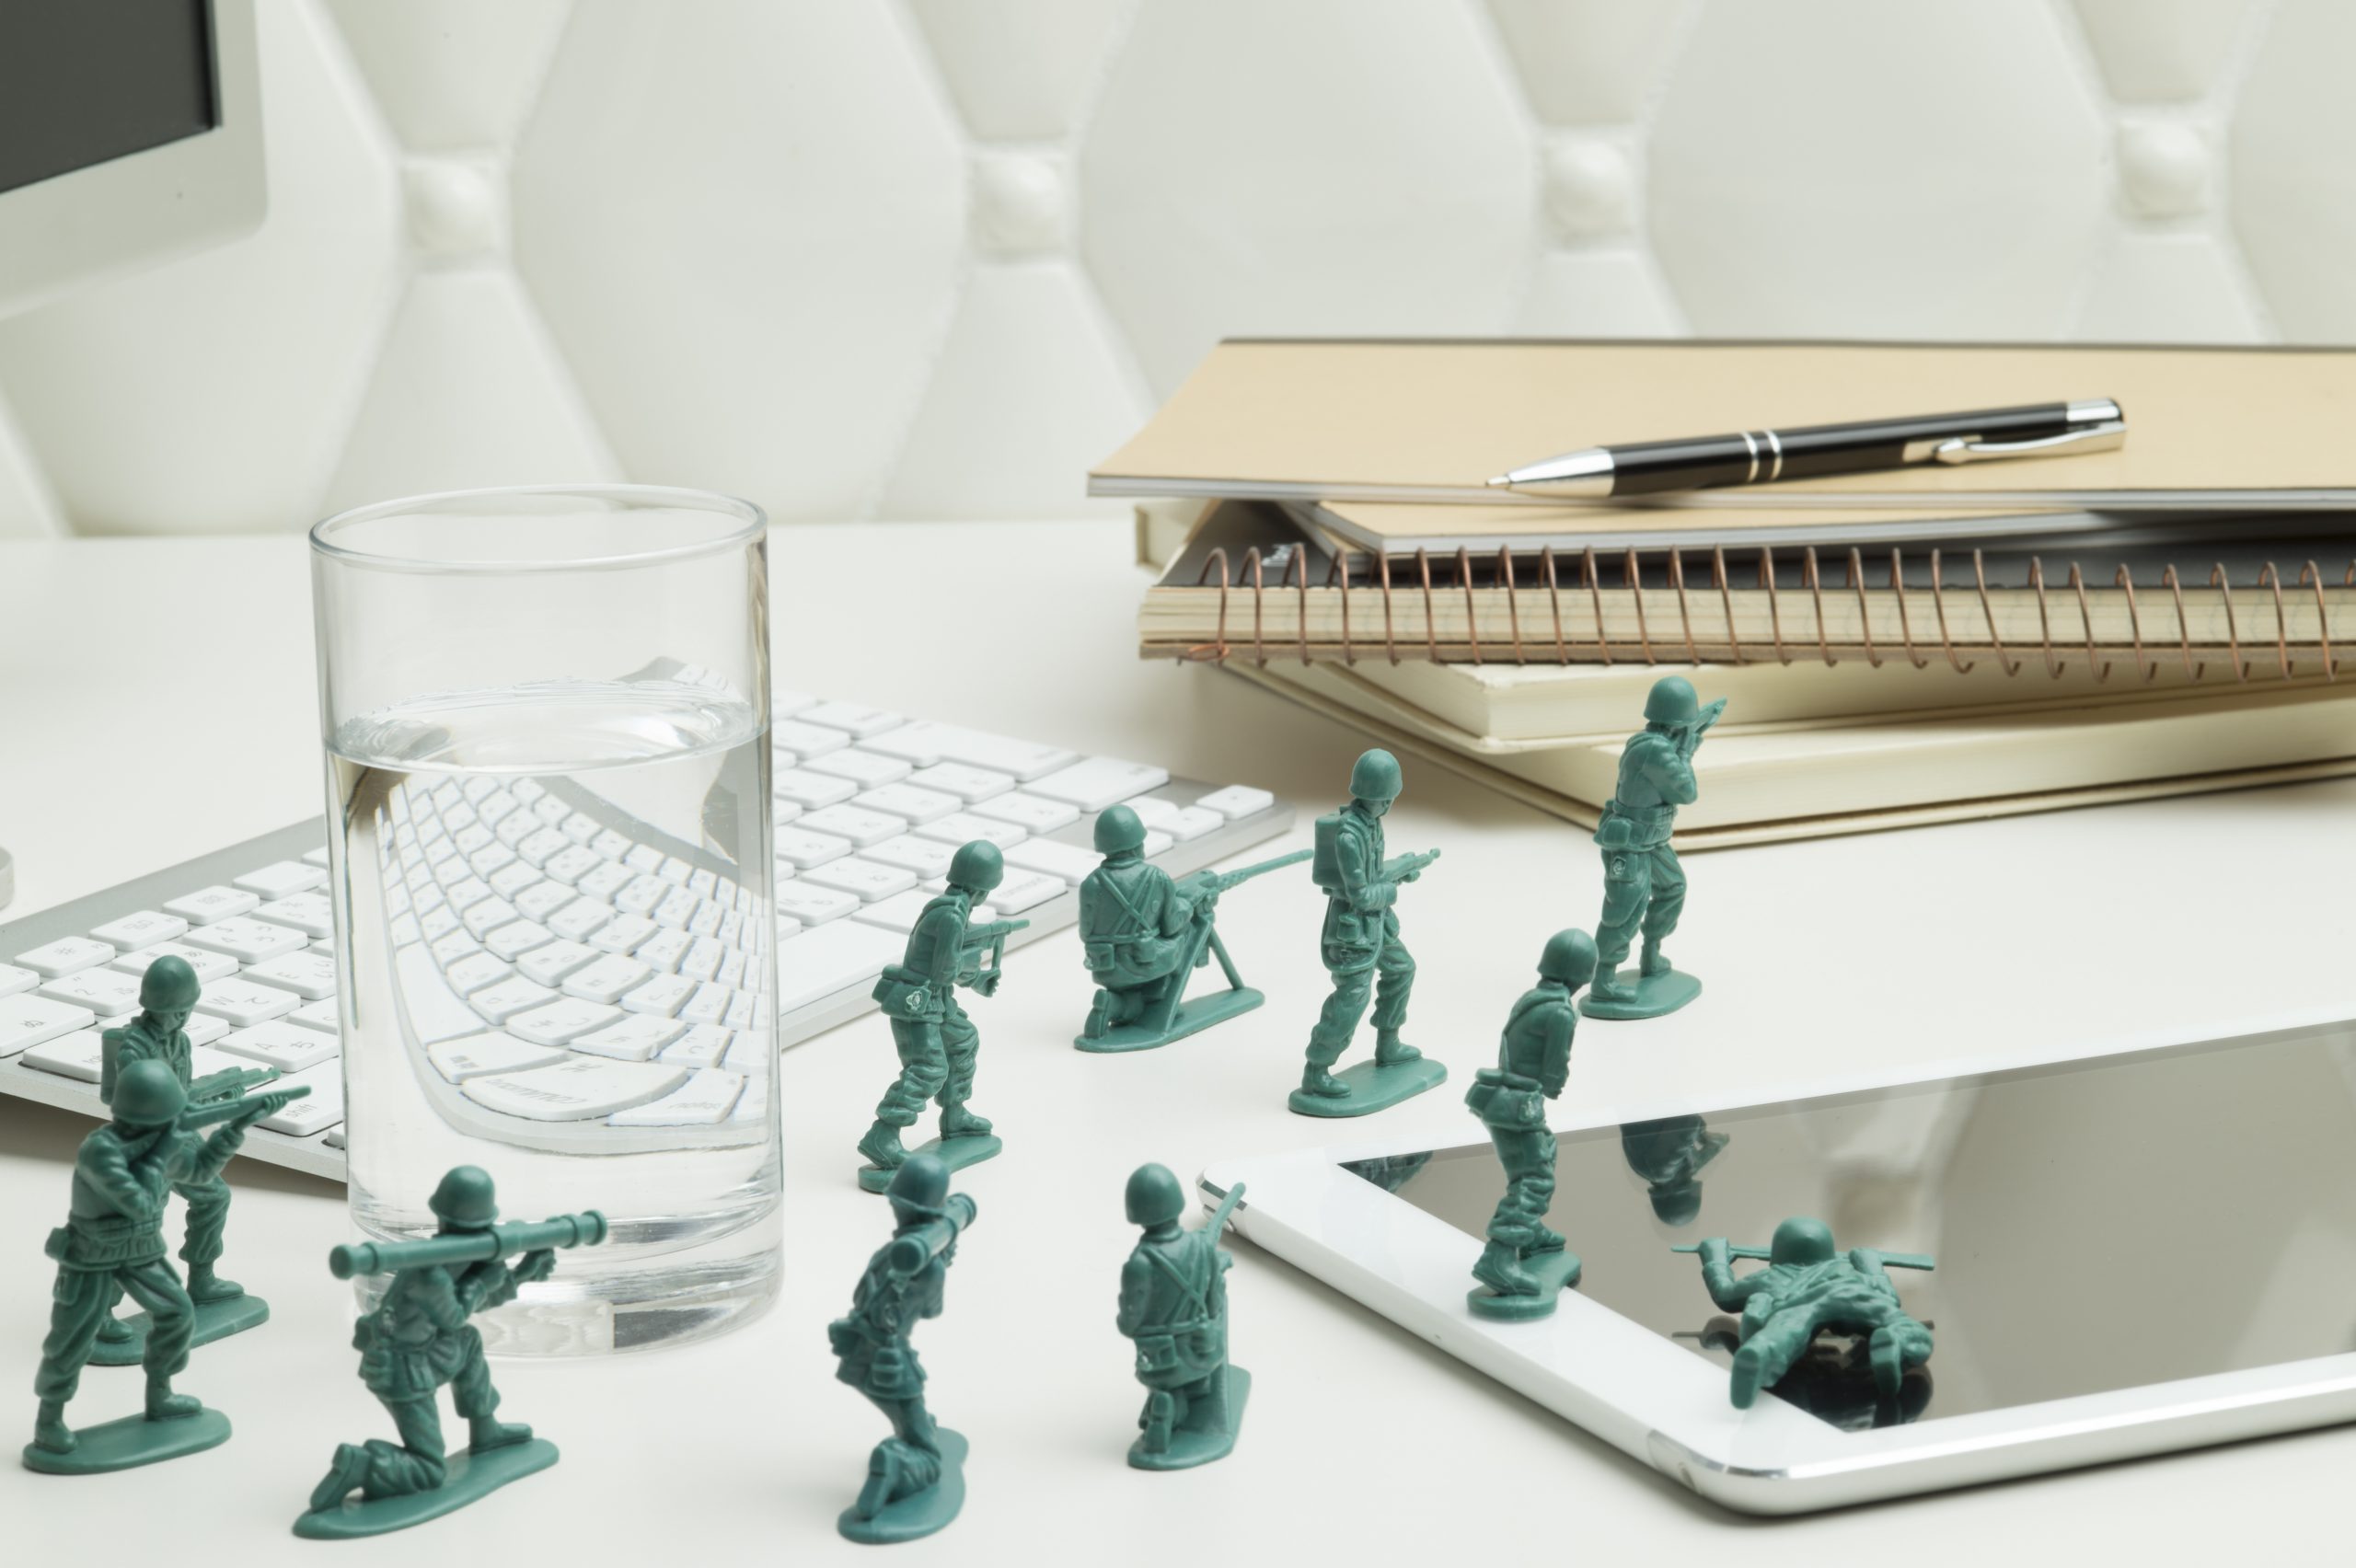 Miniature soldiers are fighting on the desk